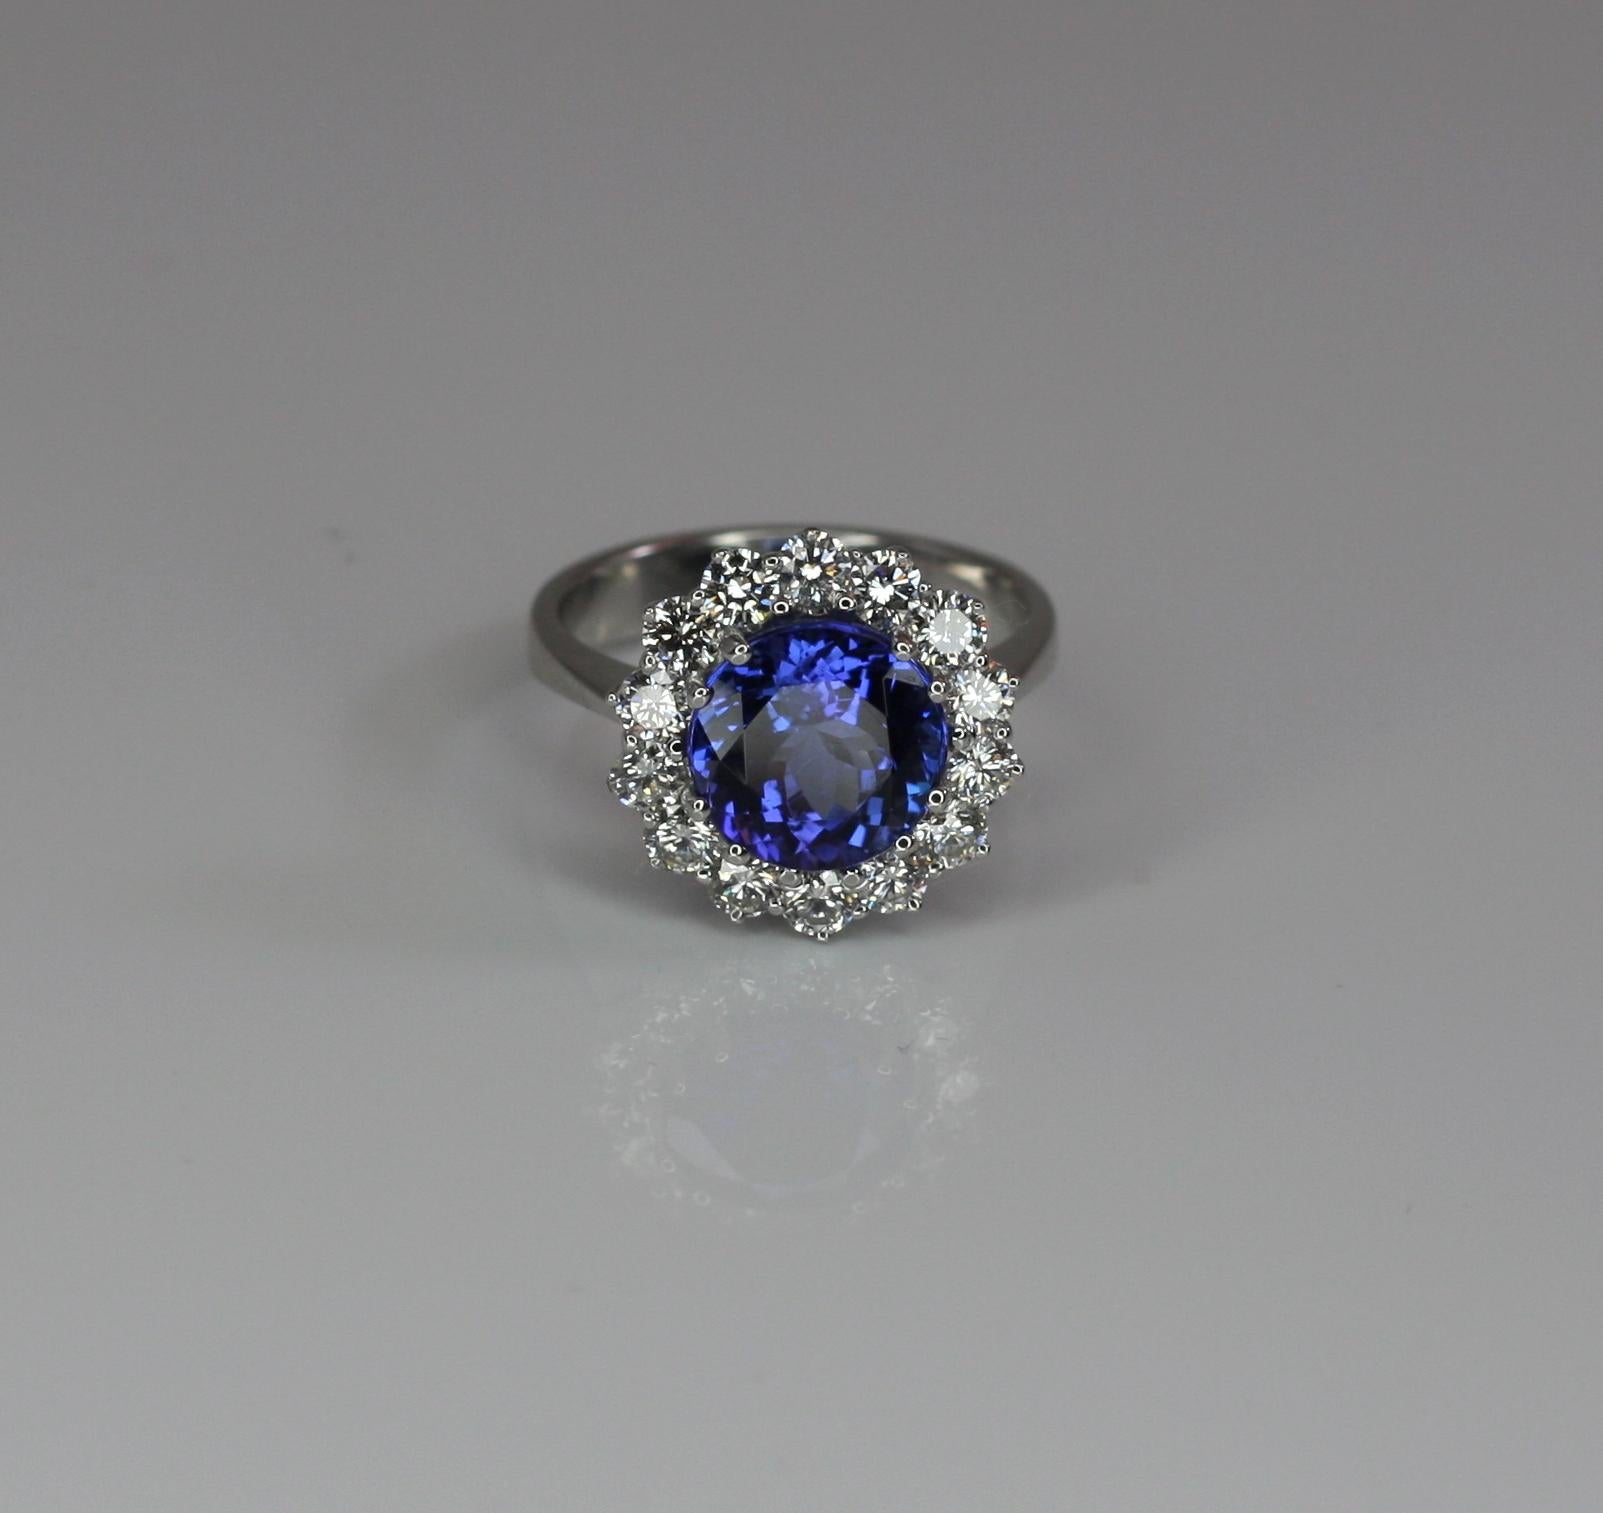 S.Georgios designer classic rosetta Tanzanite and diamond ring. This gorgeous ring features an exquisite 4.47 Carat Natural Tanzanite in round cut, accompanied by Brilliant-cut White Diamonds VVS2 color F, the total weight of 1.31 Carat, and was